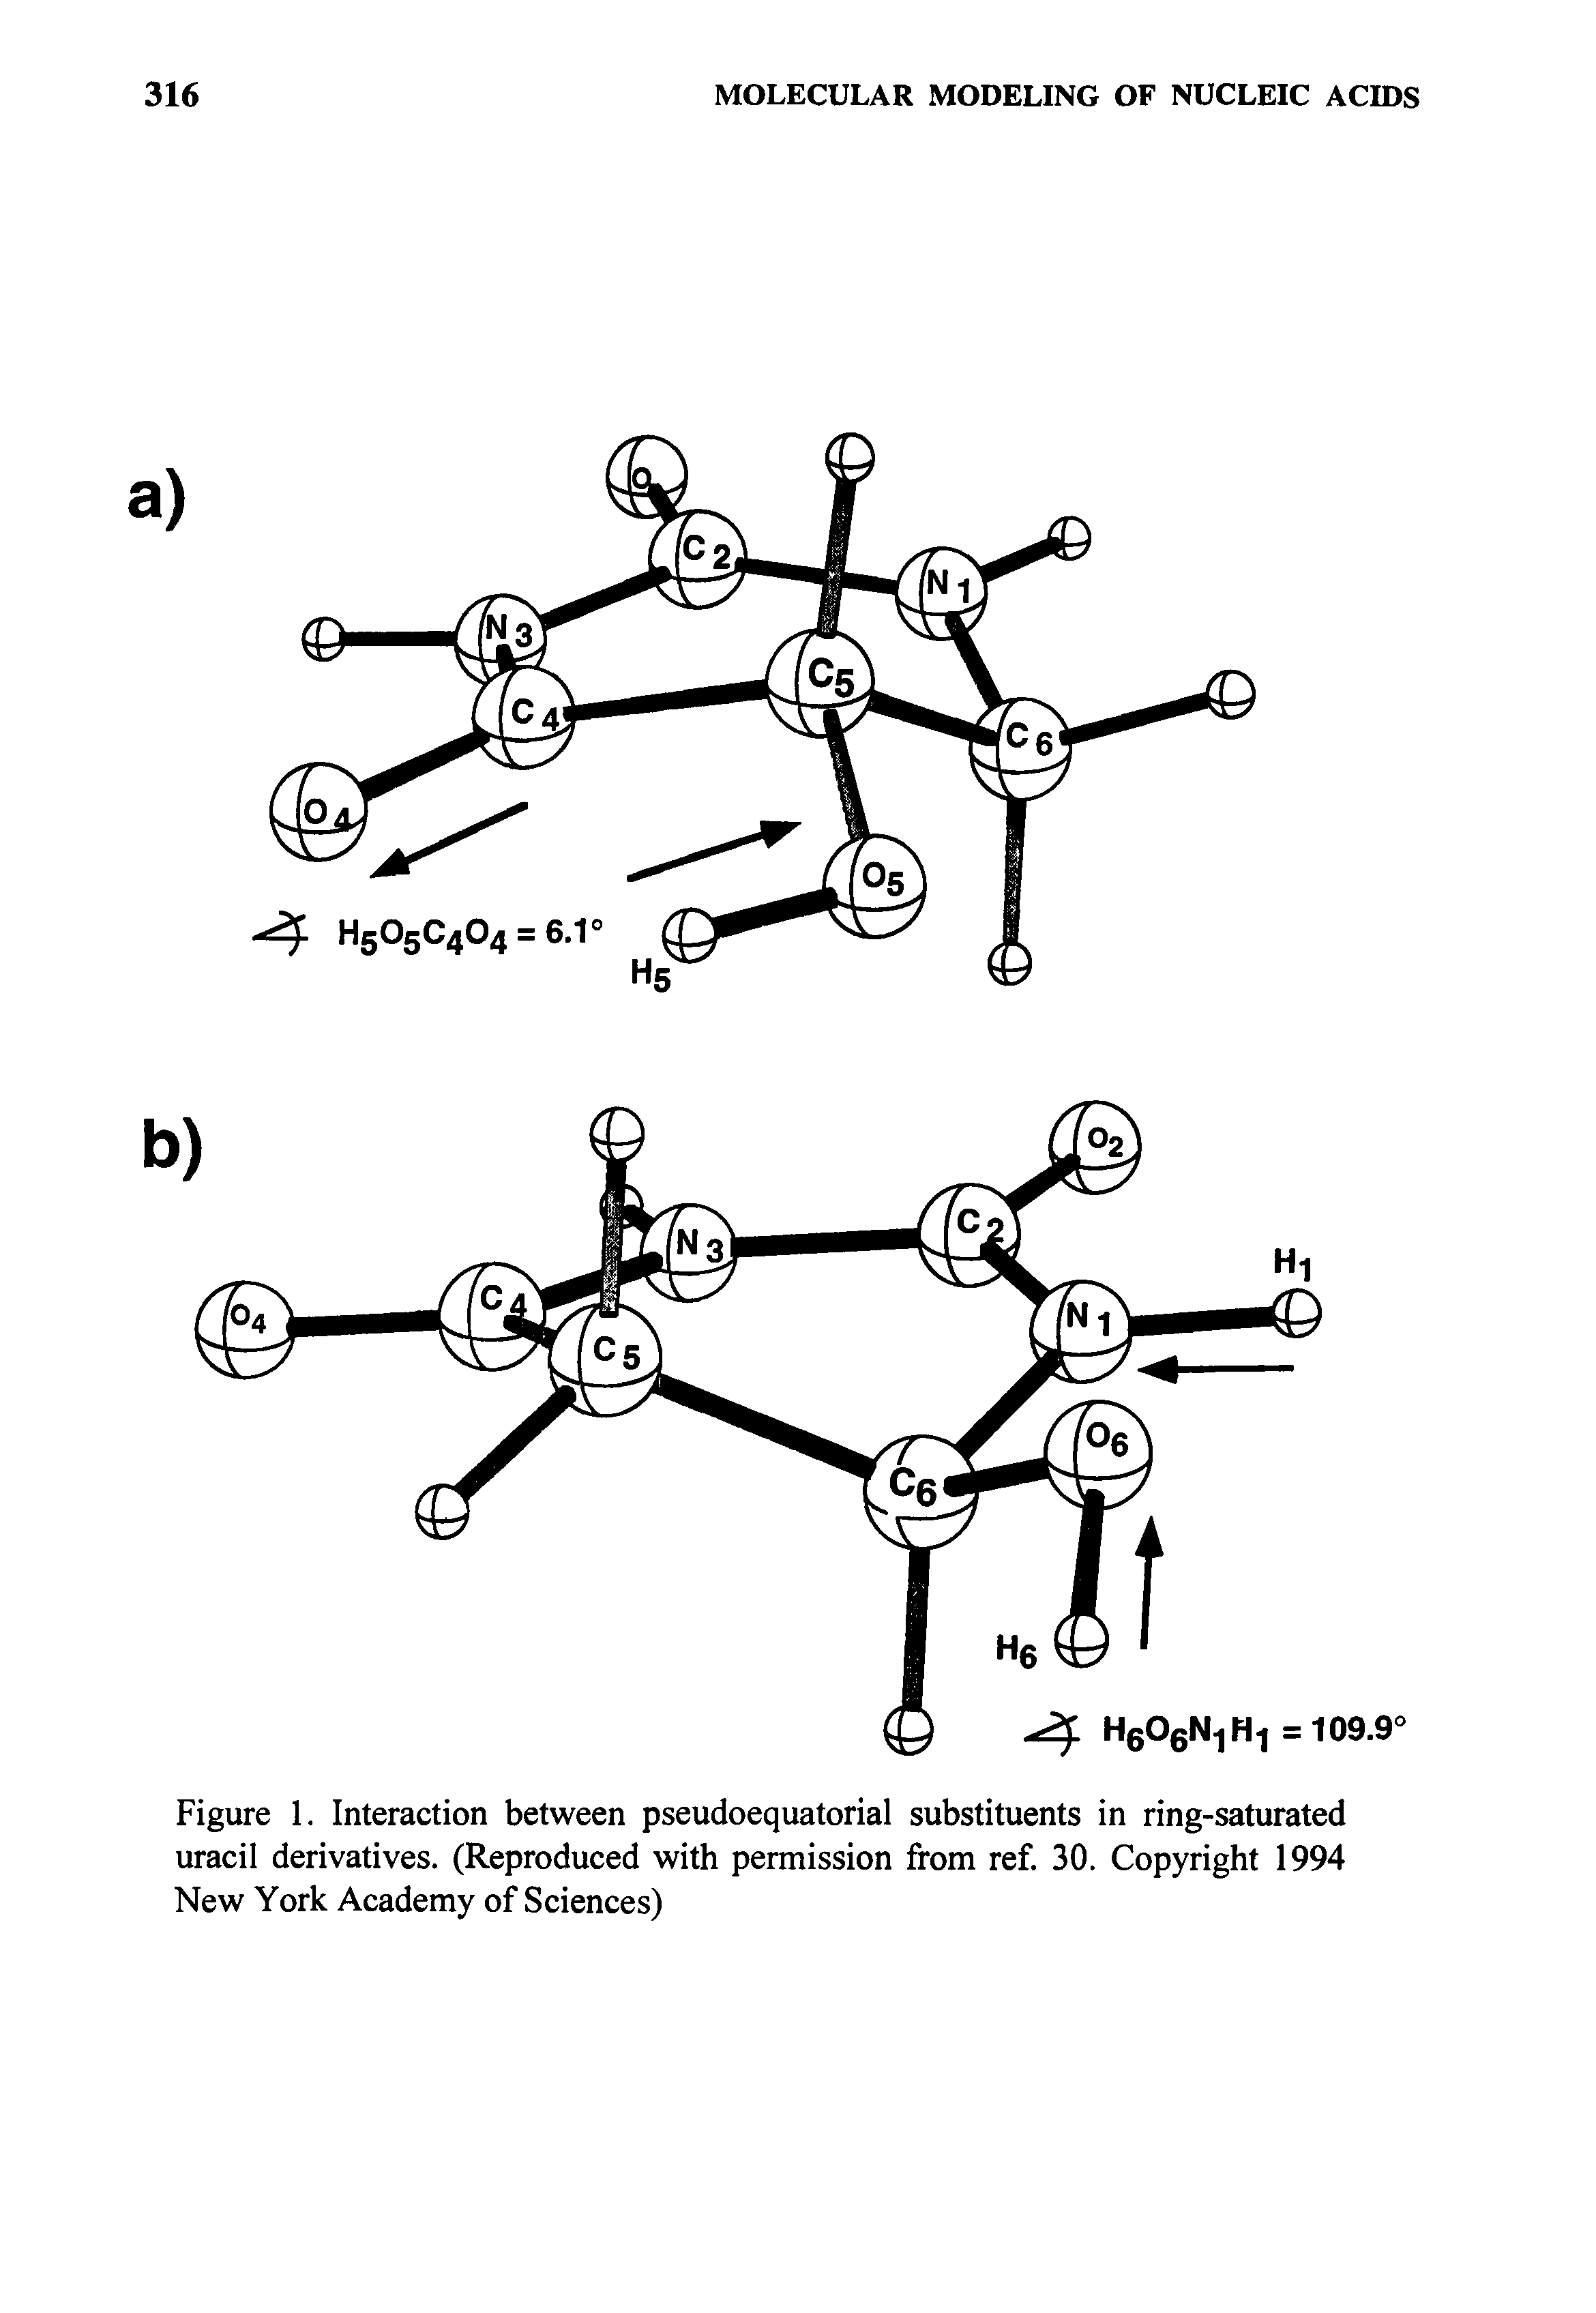 Figure 1. Interaction between pseudoequatorial substituents in ring-saturated uracil derivatives. (Reproduced with permission from ref. 30. Copyright 1994 New York Academy of Sciences)...